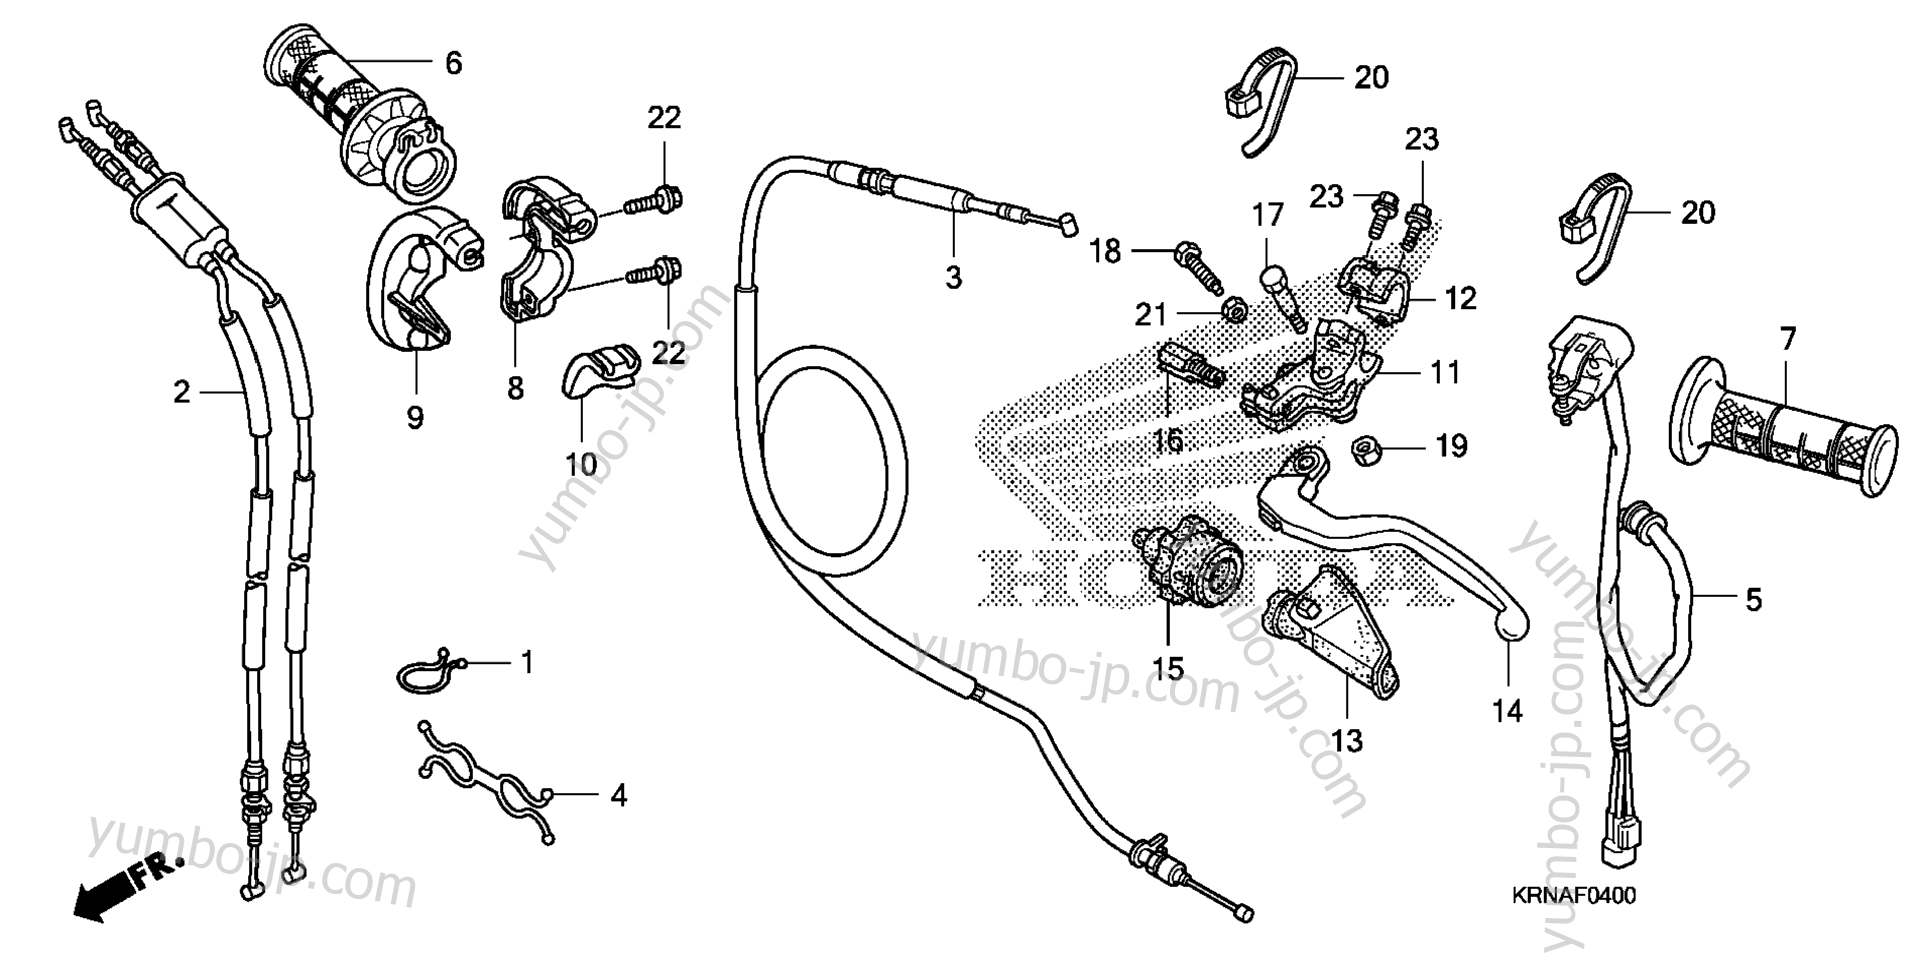 HANDLE LEVER / SWITCH / CABLE for motorcycles HONDA CRF250R A 2012 year